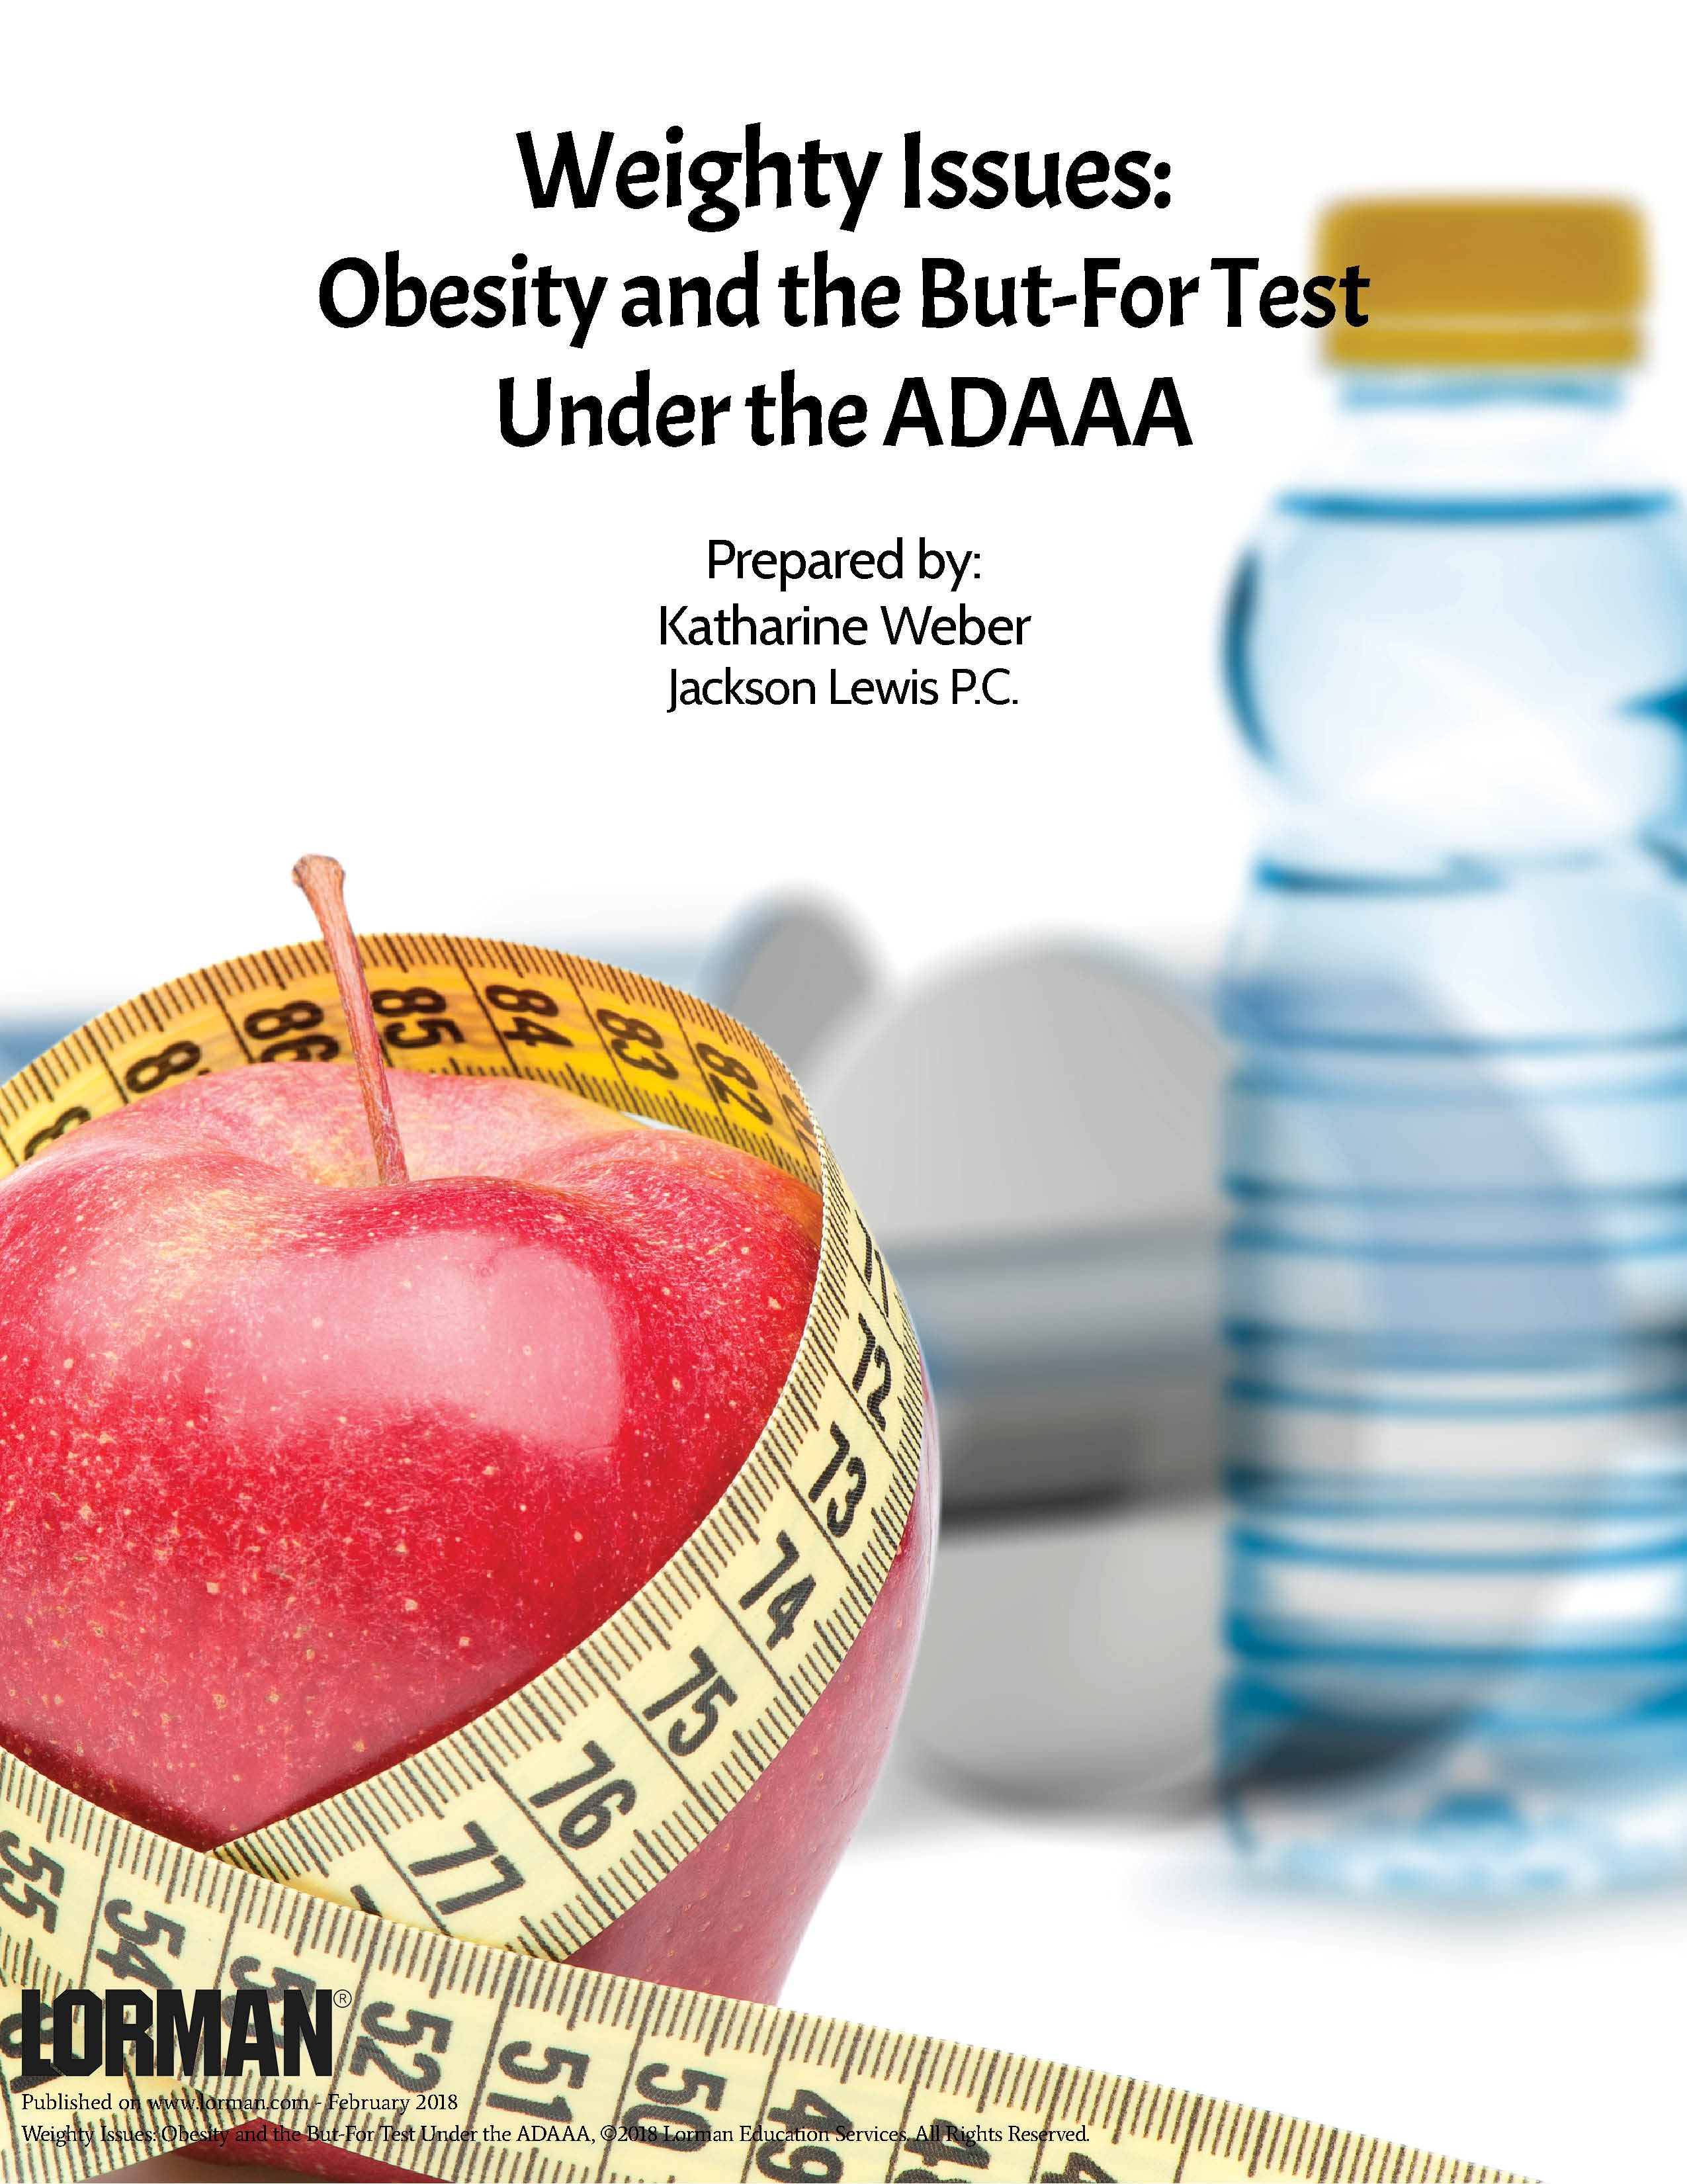 Weighty Issues: Obesity and the But-For Test Under the ADAAA